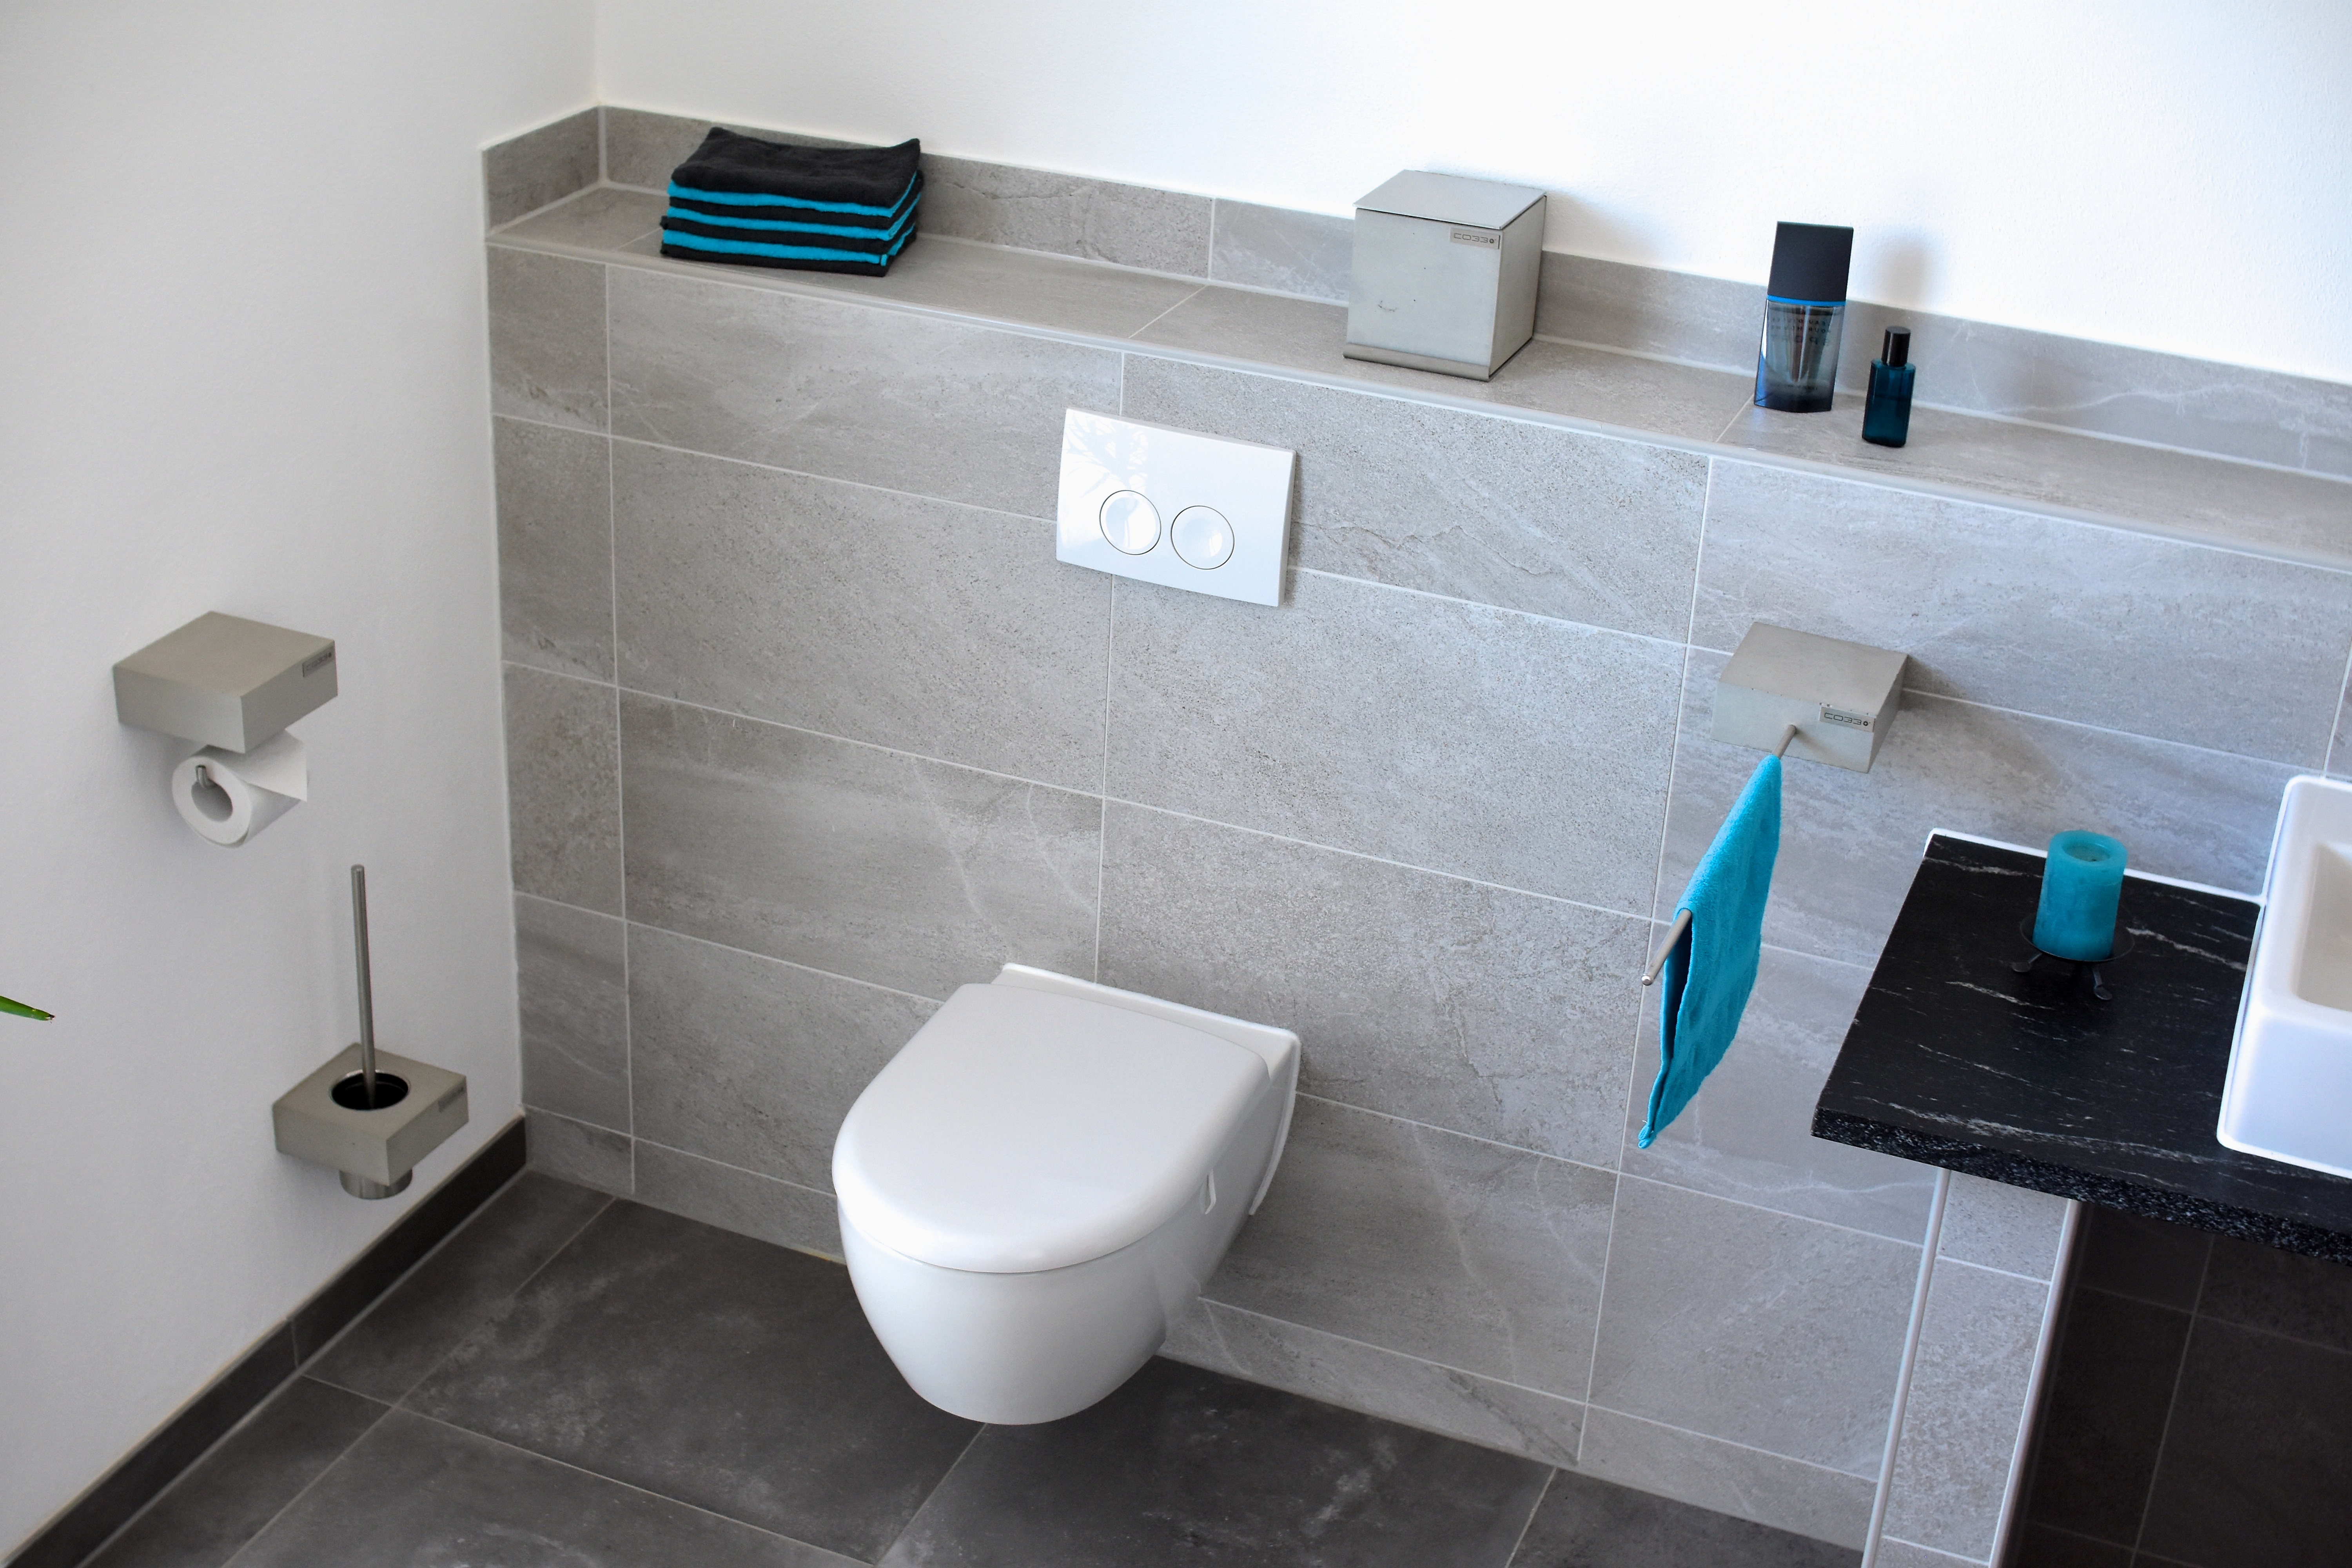 Real concrete bathroom accessories: Toilet Roll Holder, Toilet Brush Holder, Hand Towel Holder and Storage Container